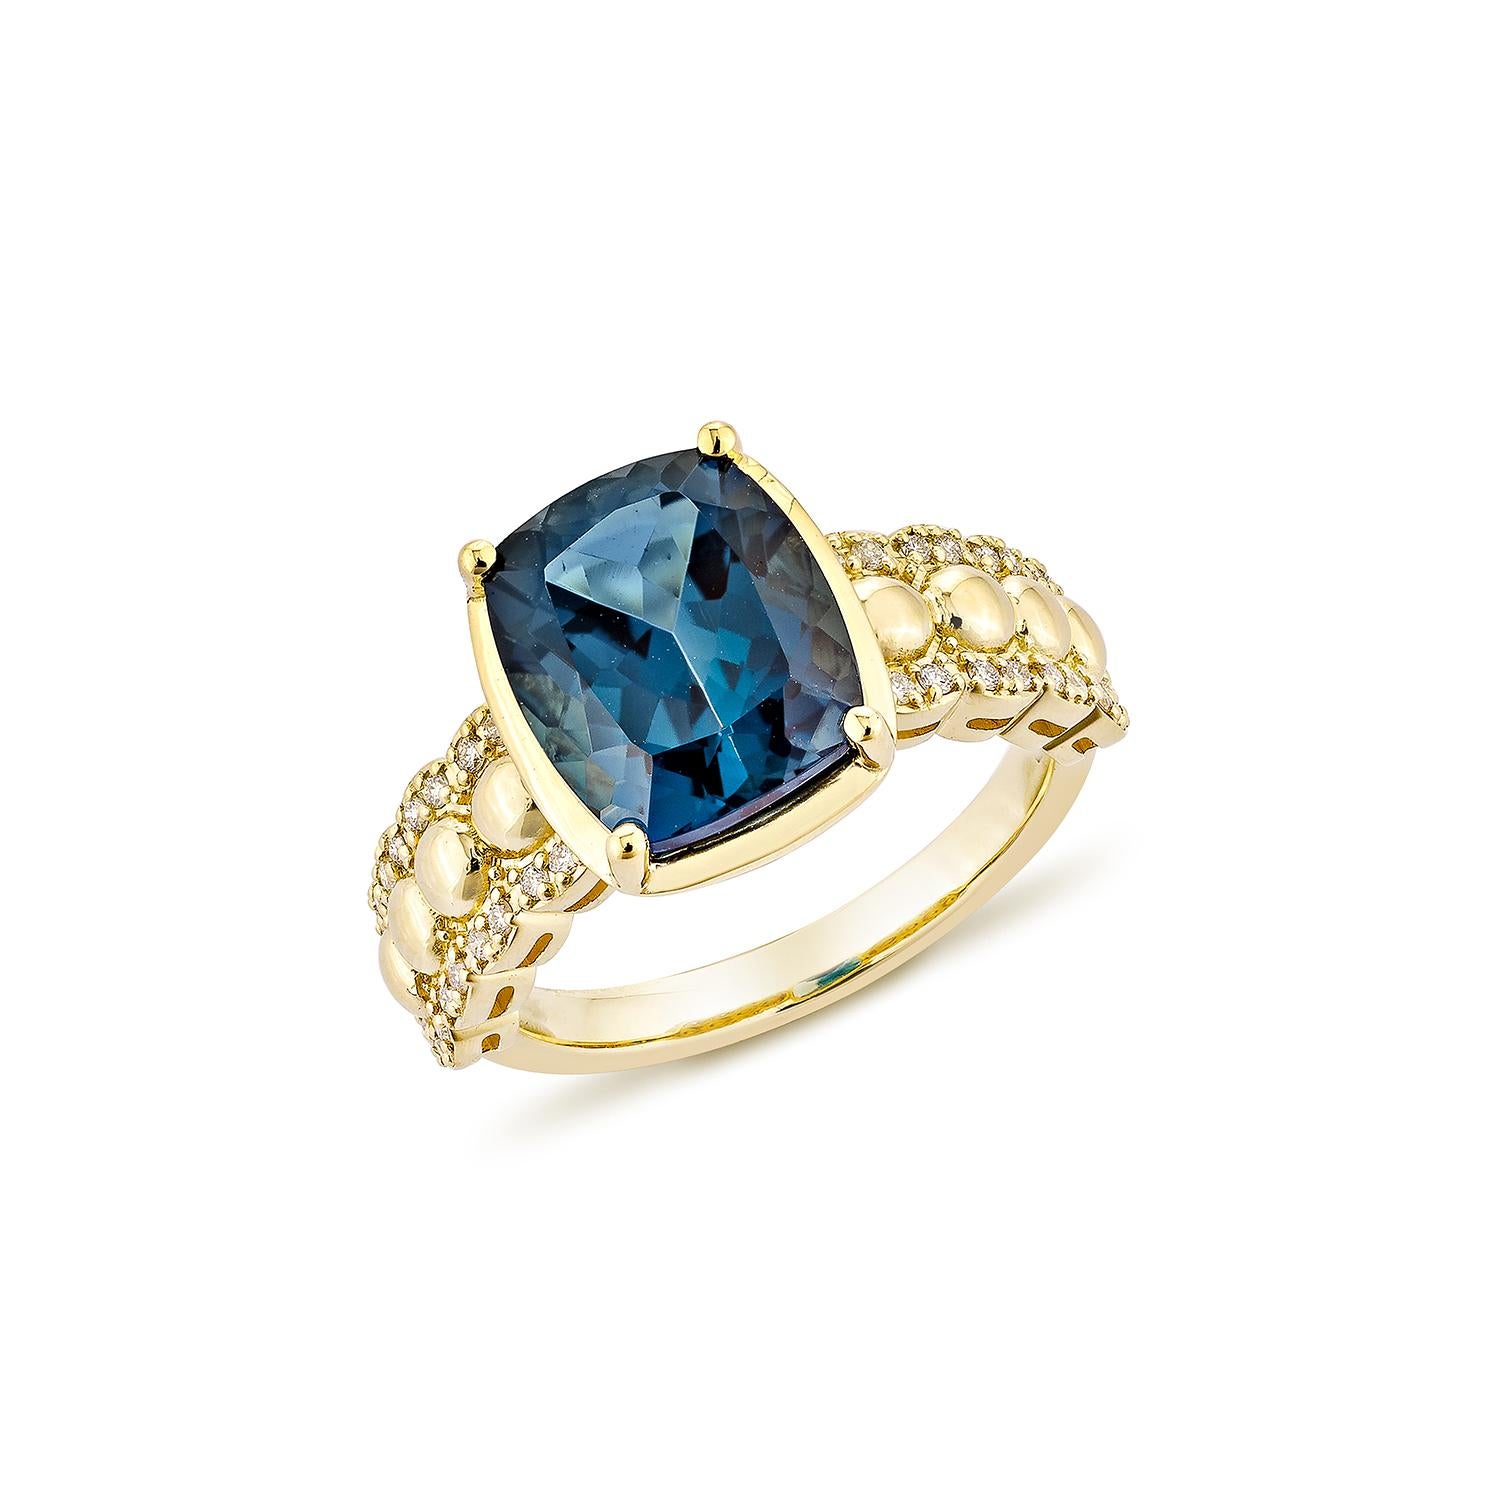 Contemporary 5.22 Carat London Blue Topaz Fancy Ring in 18Karat Yellow Gold with Diamond. For Sale